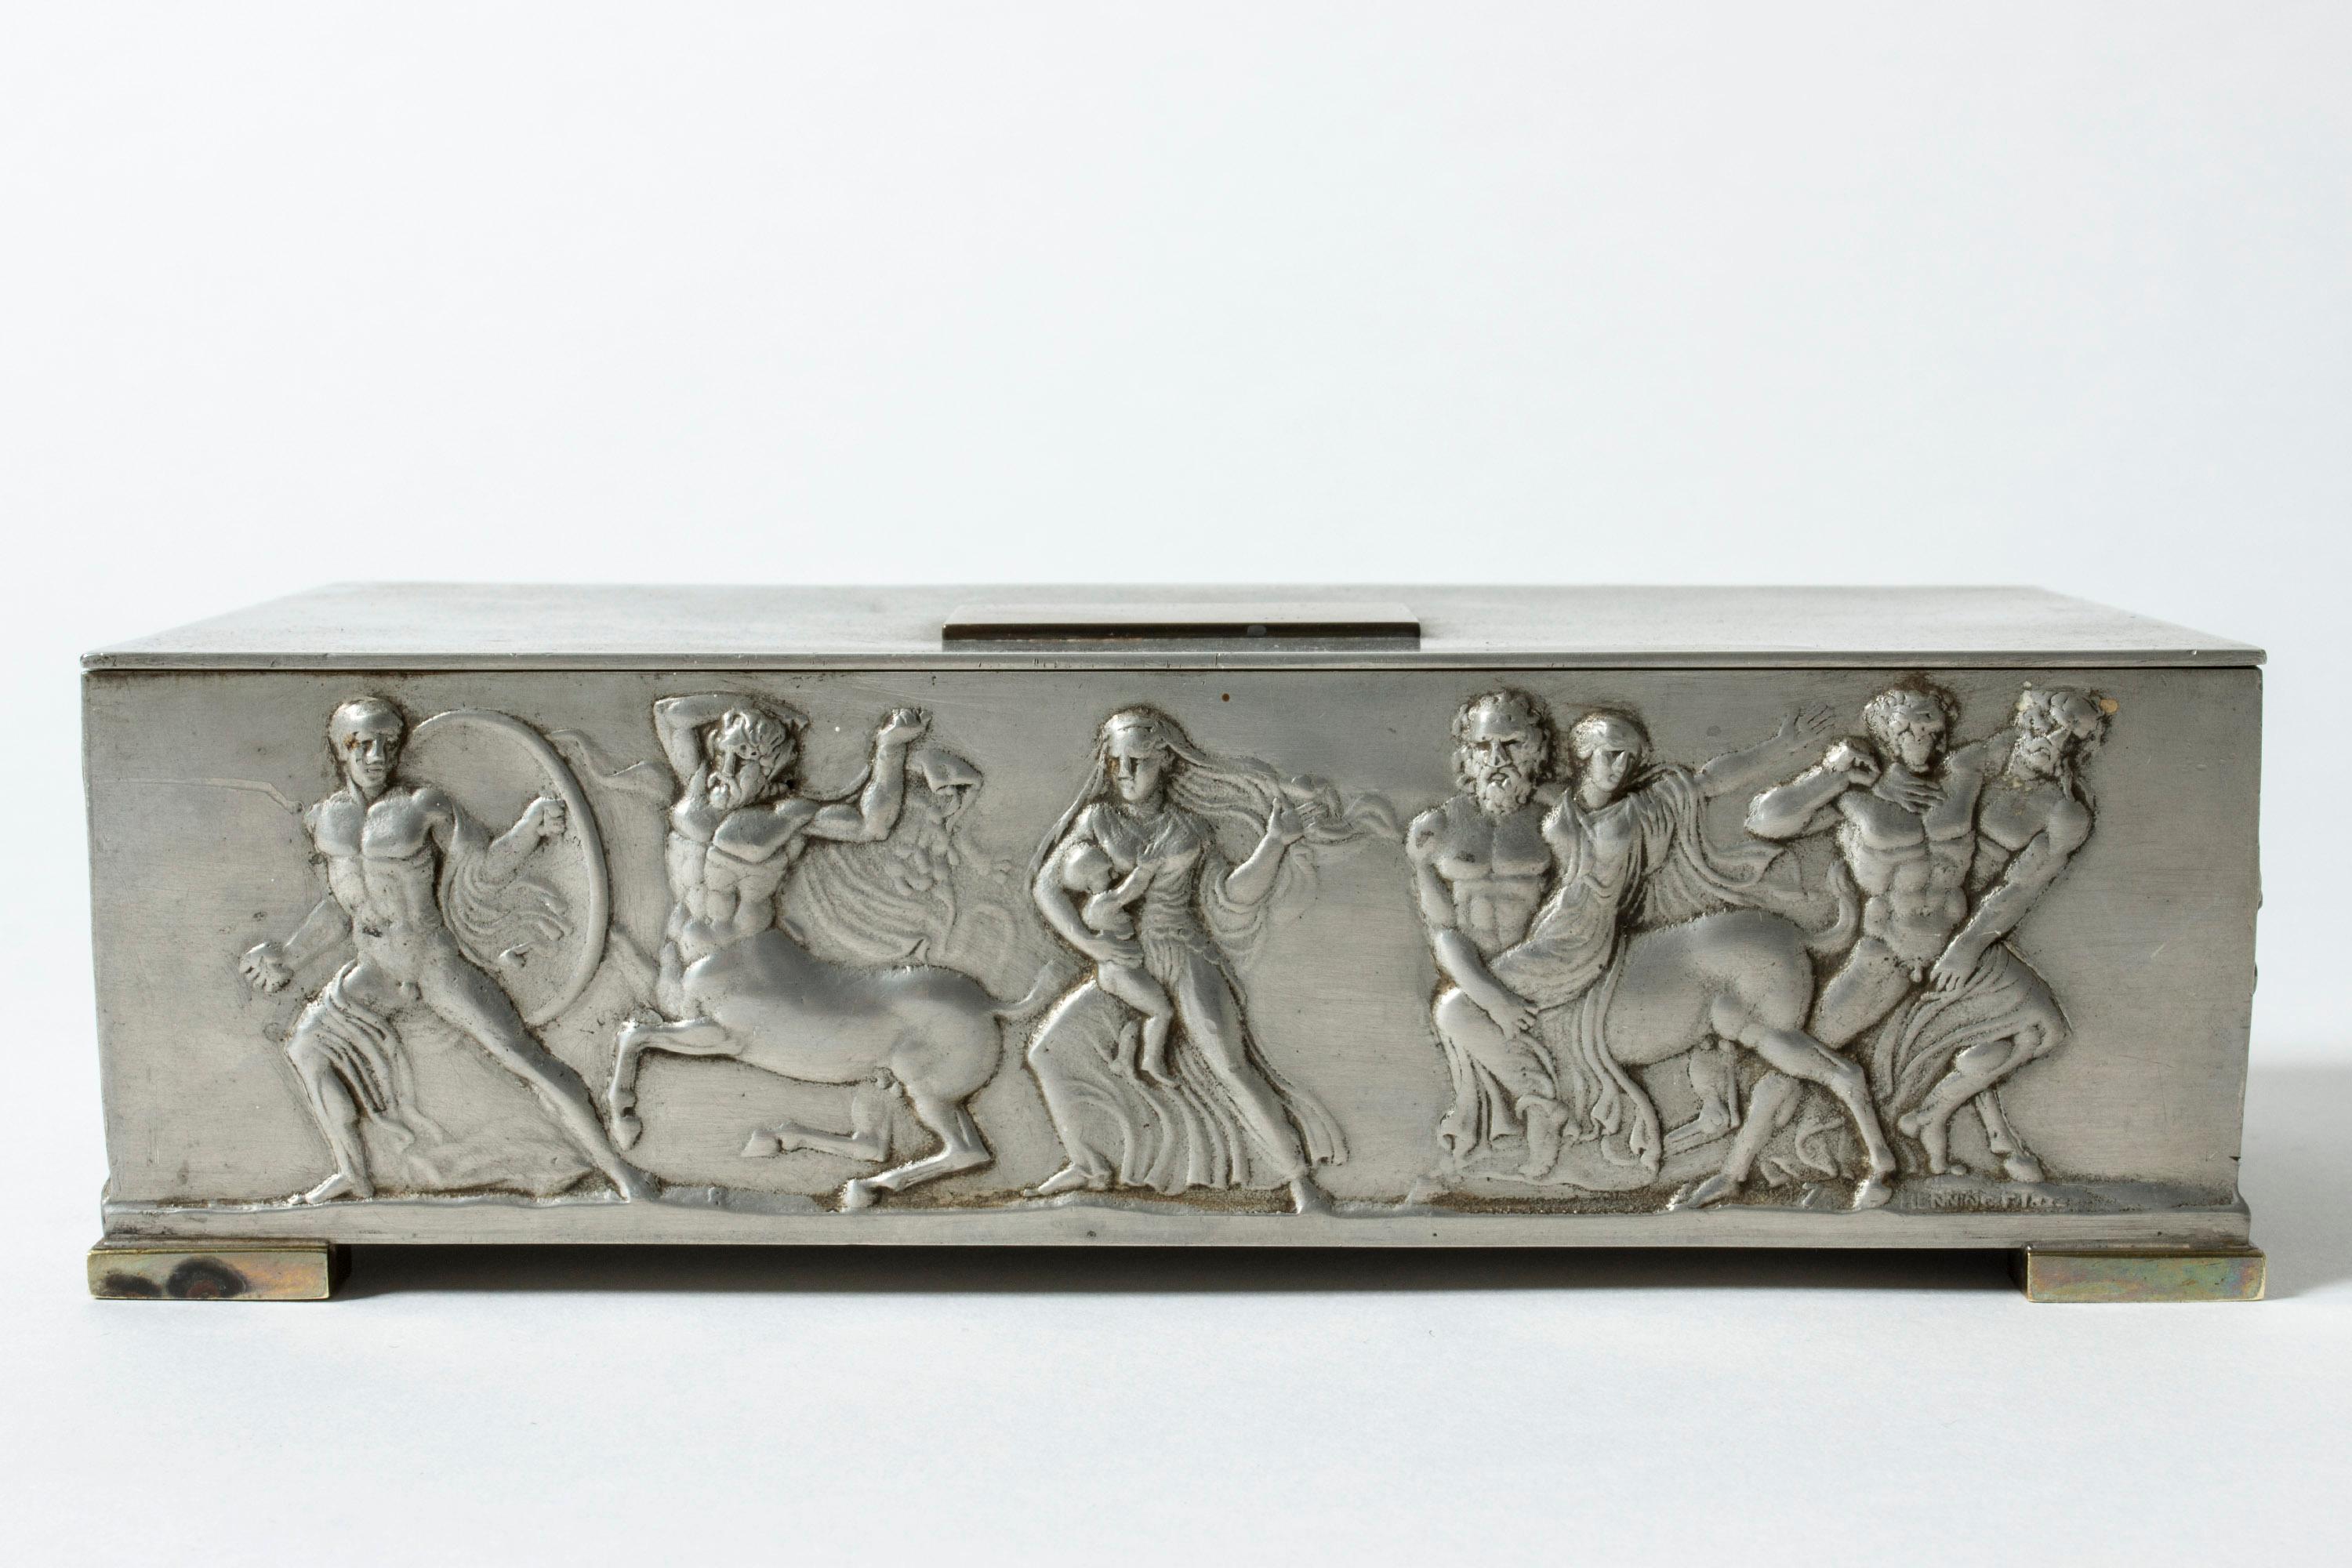 Beautiful pewter box from Herman Bergman, adorned with a strict pewter rectangle on top. Beautiful execution.

The images depicted are from the Bassai (sometimes spelled Bassae) Frieze, which was originally a part of the Temple of Apollo